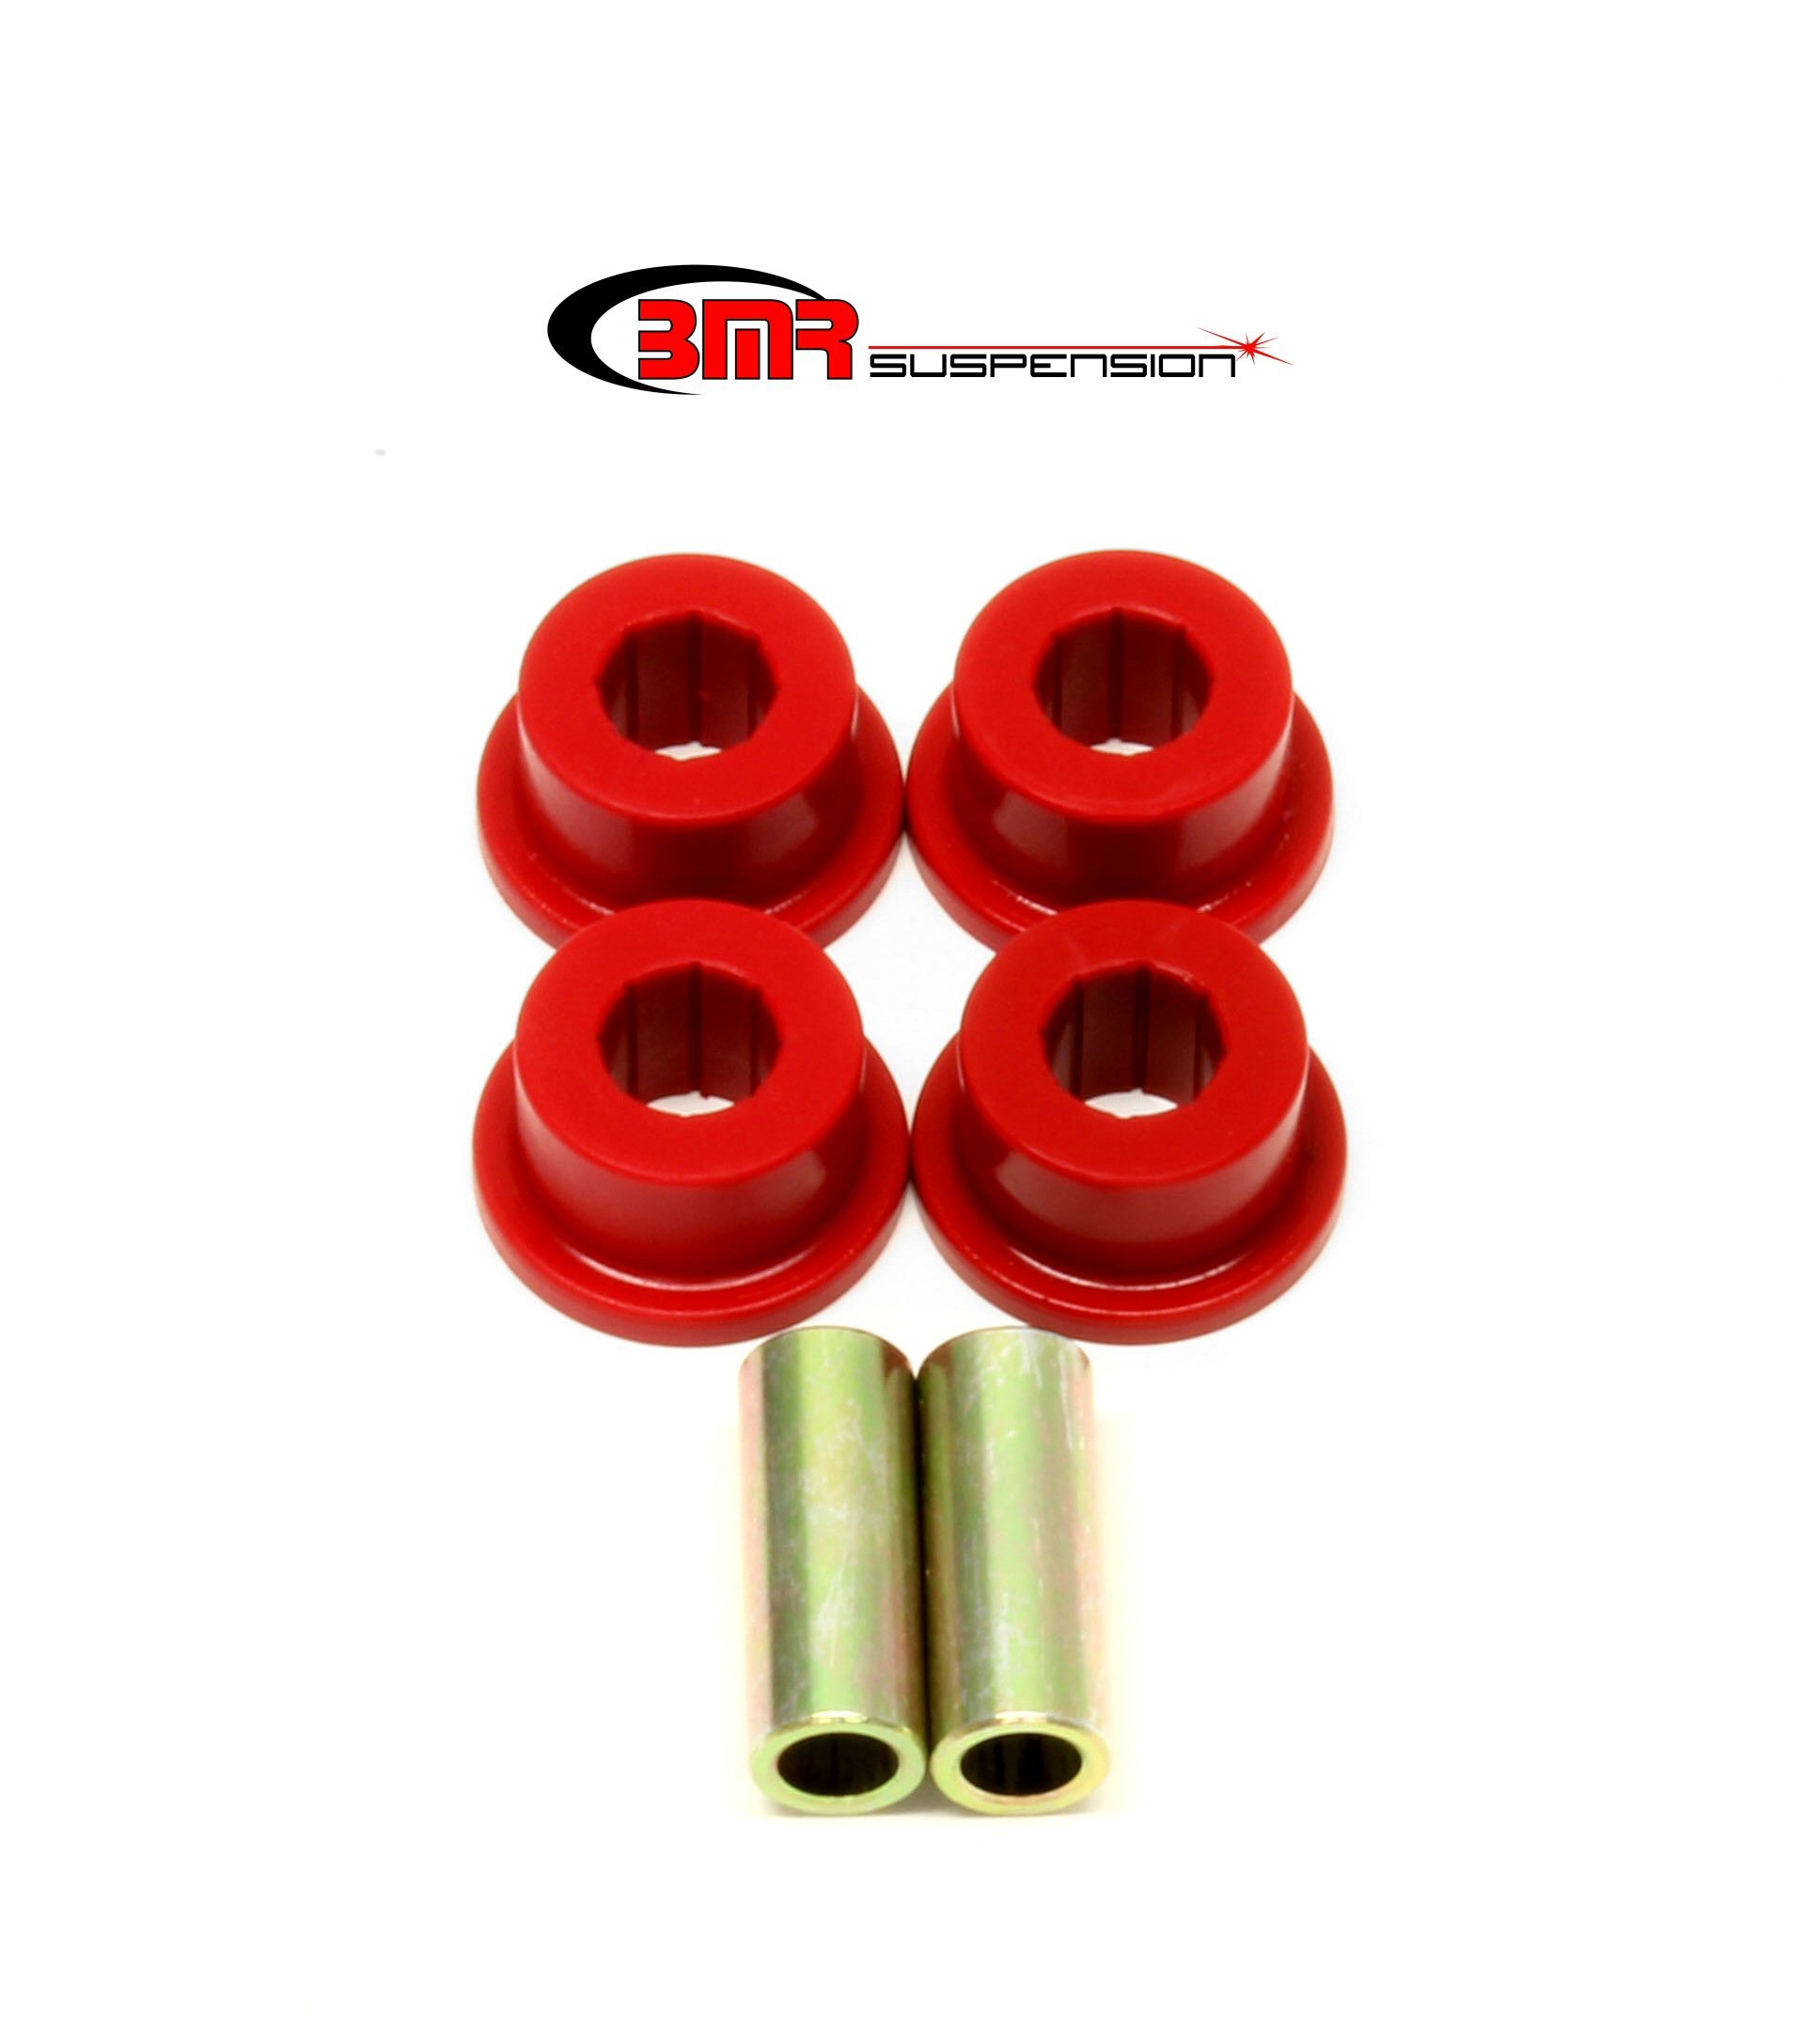 BMR Suspension BK006 Trailing Arm Bushing, Rear, Outer, Polyurethane / Steel, Red / Cadmium Plated, Chevy Camaro 2010-15, Kit